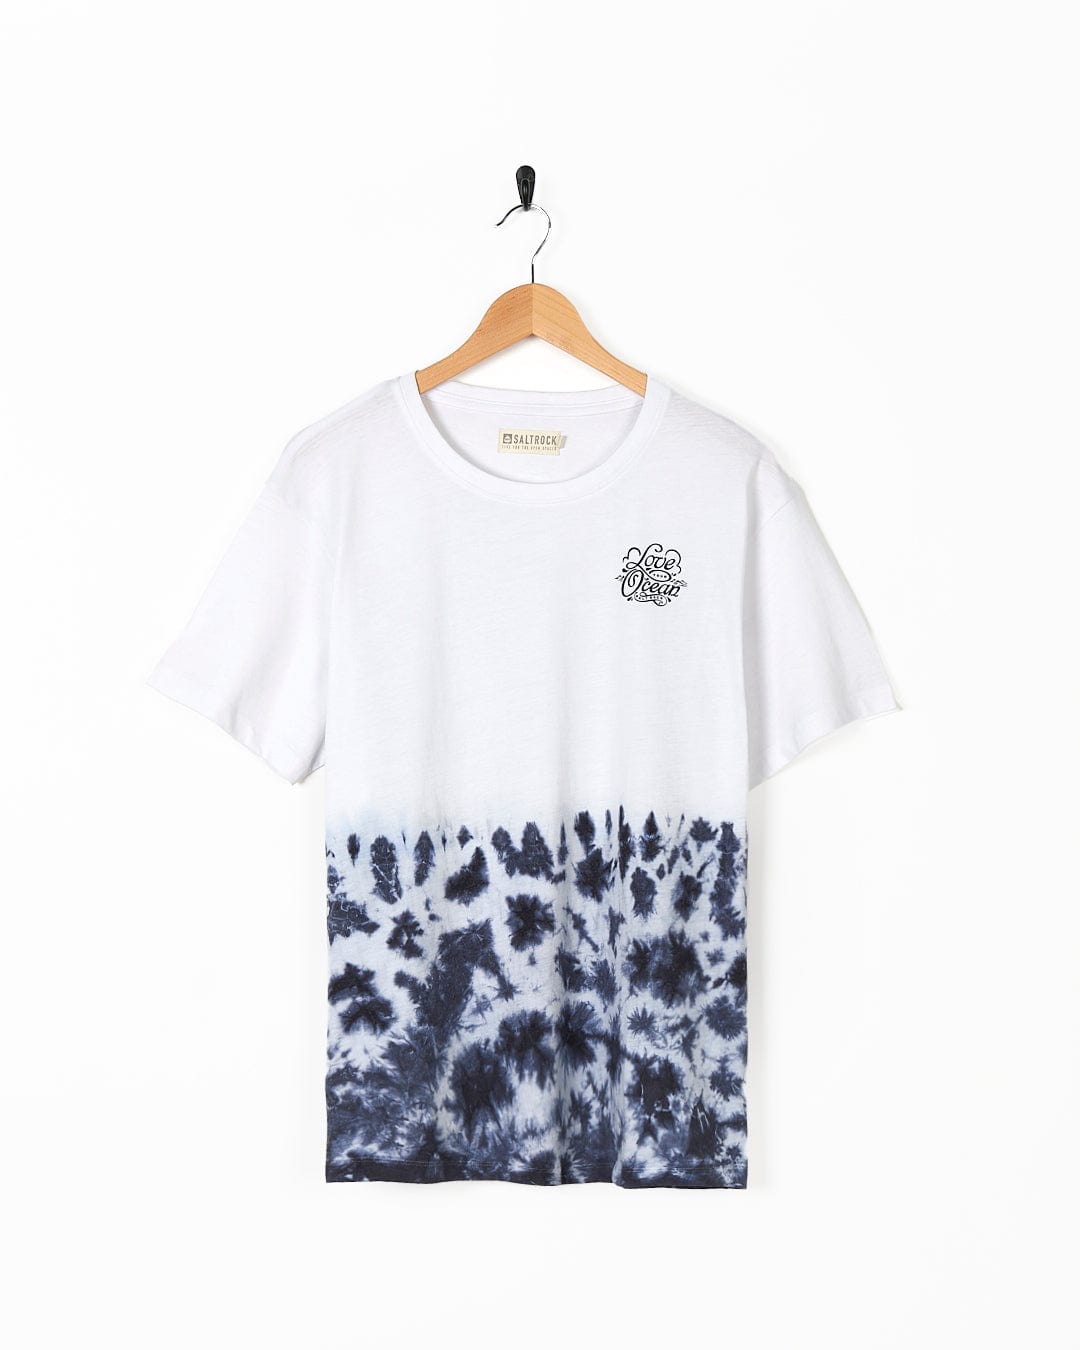 A Saltrock Astra - Womens Short Sleeve T-Shirt - White with a black and white leopard print.